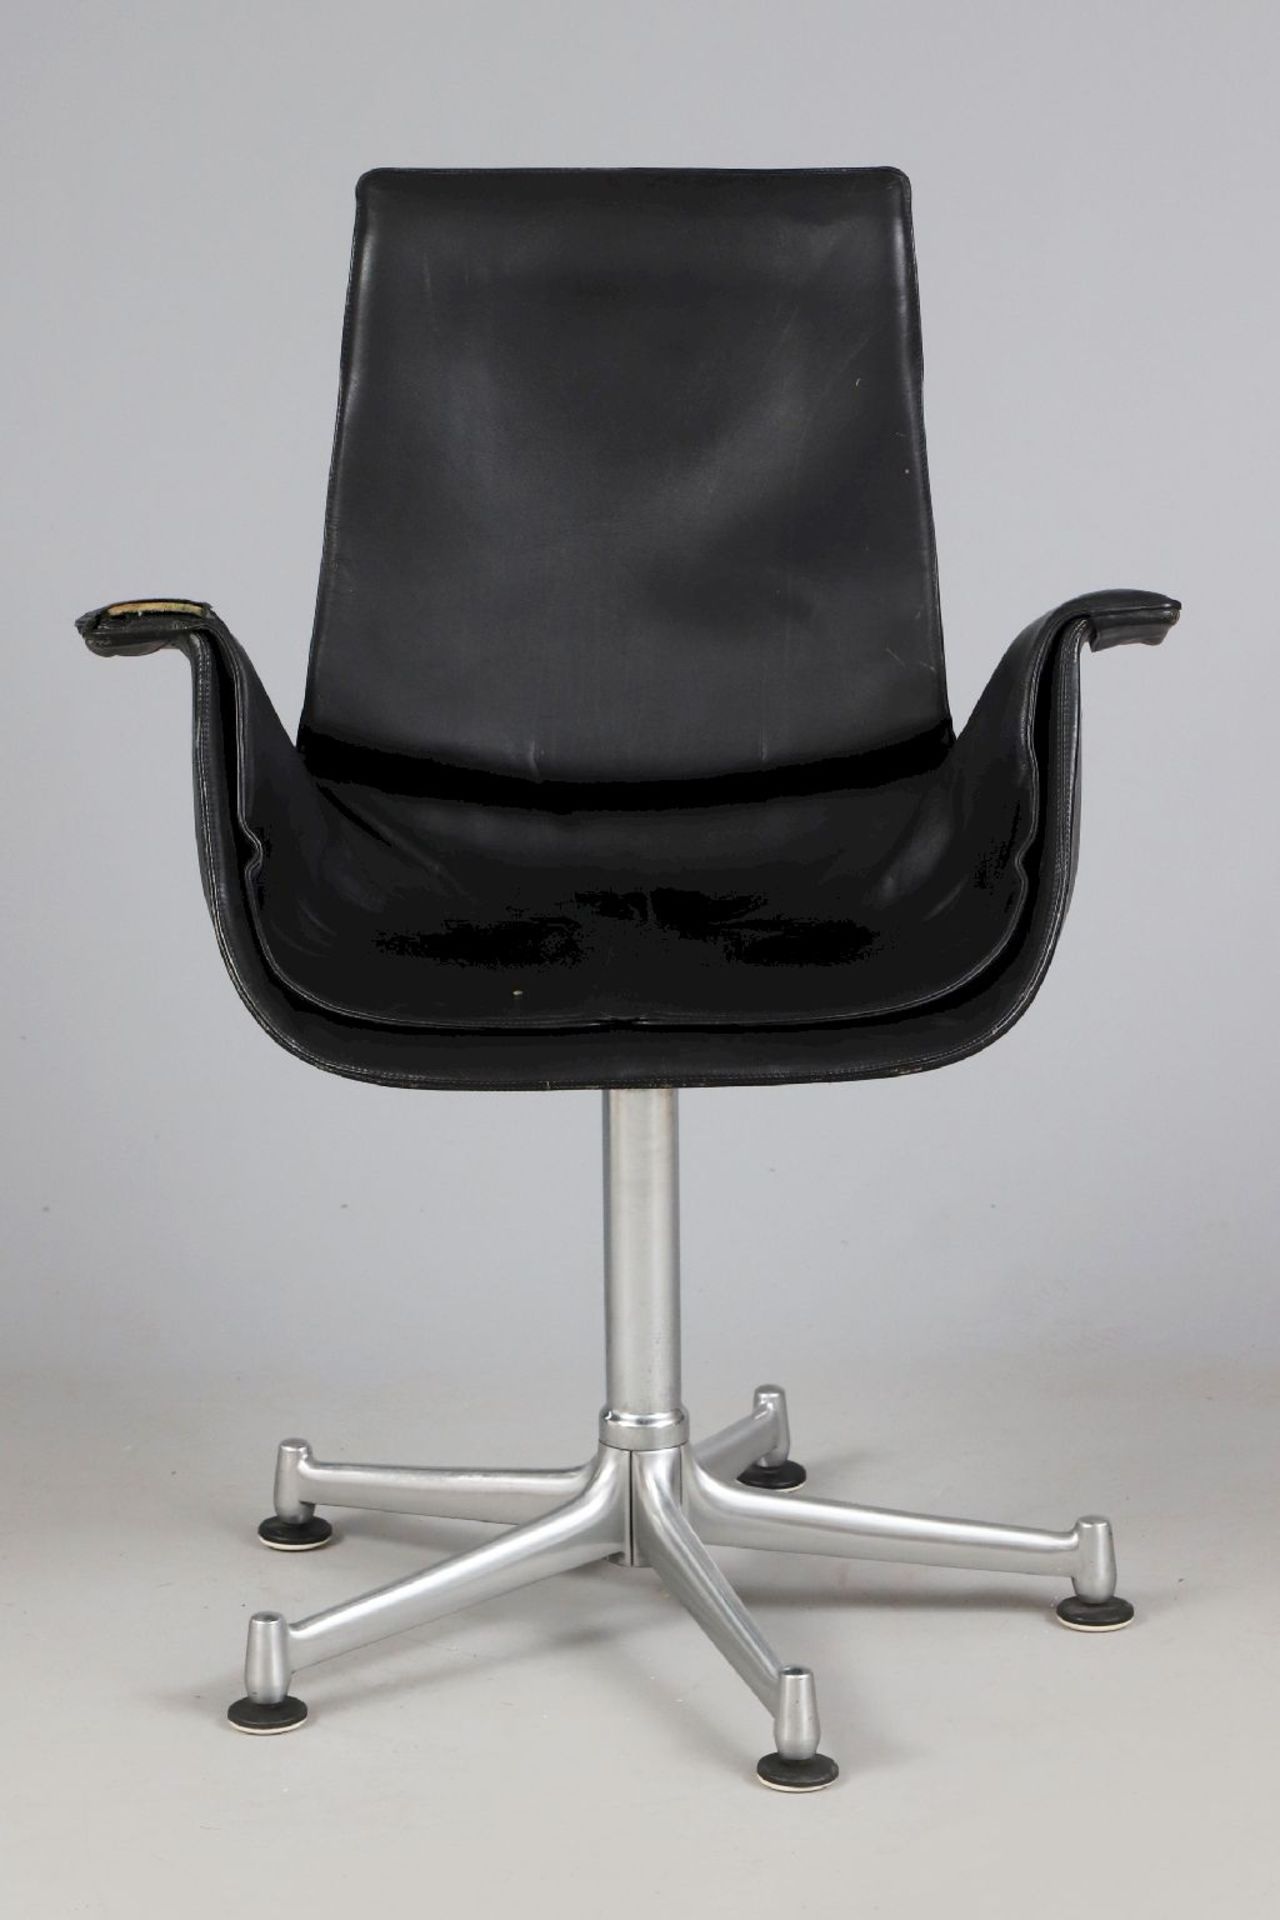 FK 6725 Tulip Chair - Image 2 of 4